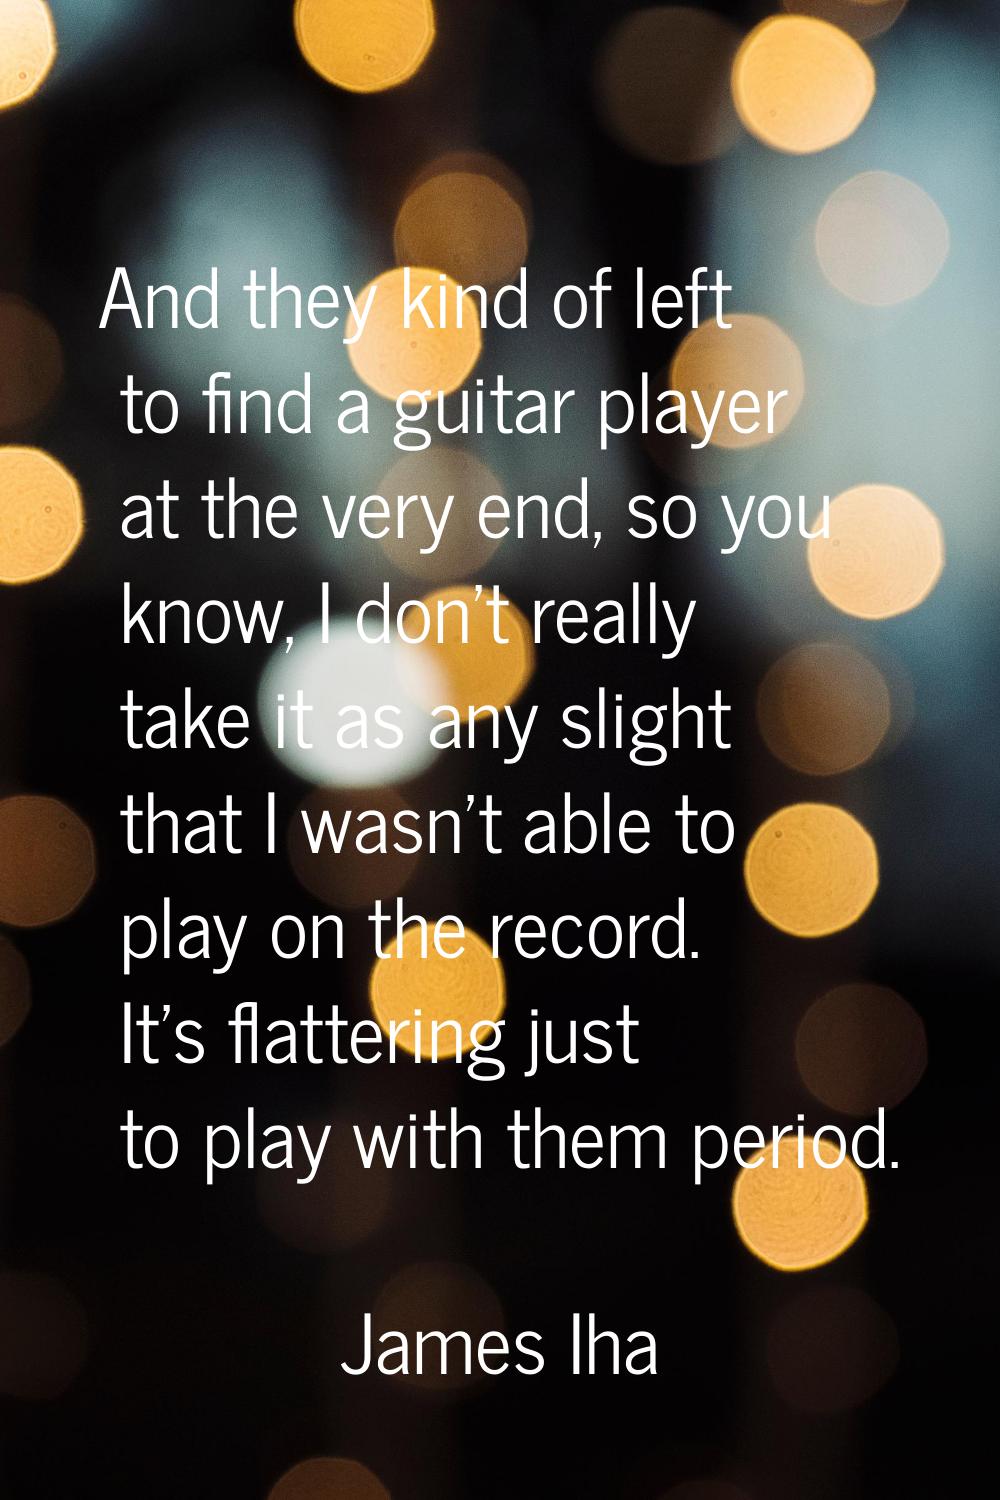 And they kind of left to find a guitar player at the very end, so you know, I don't really take it 